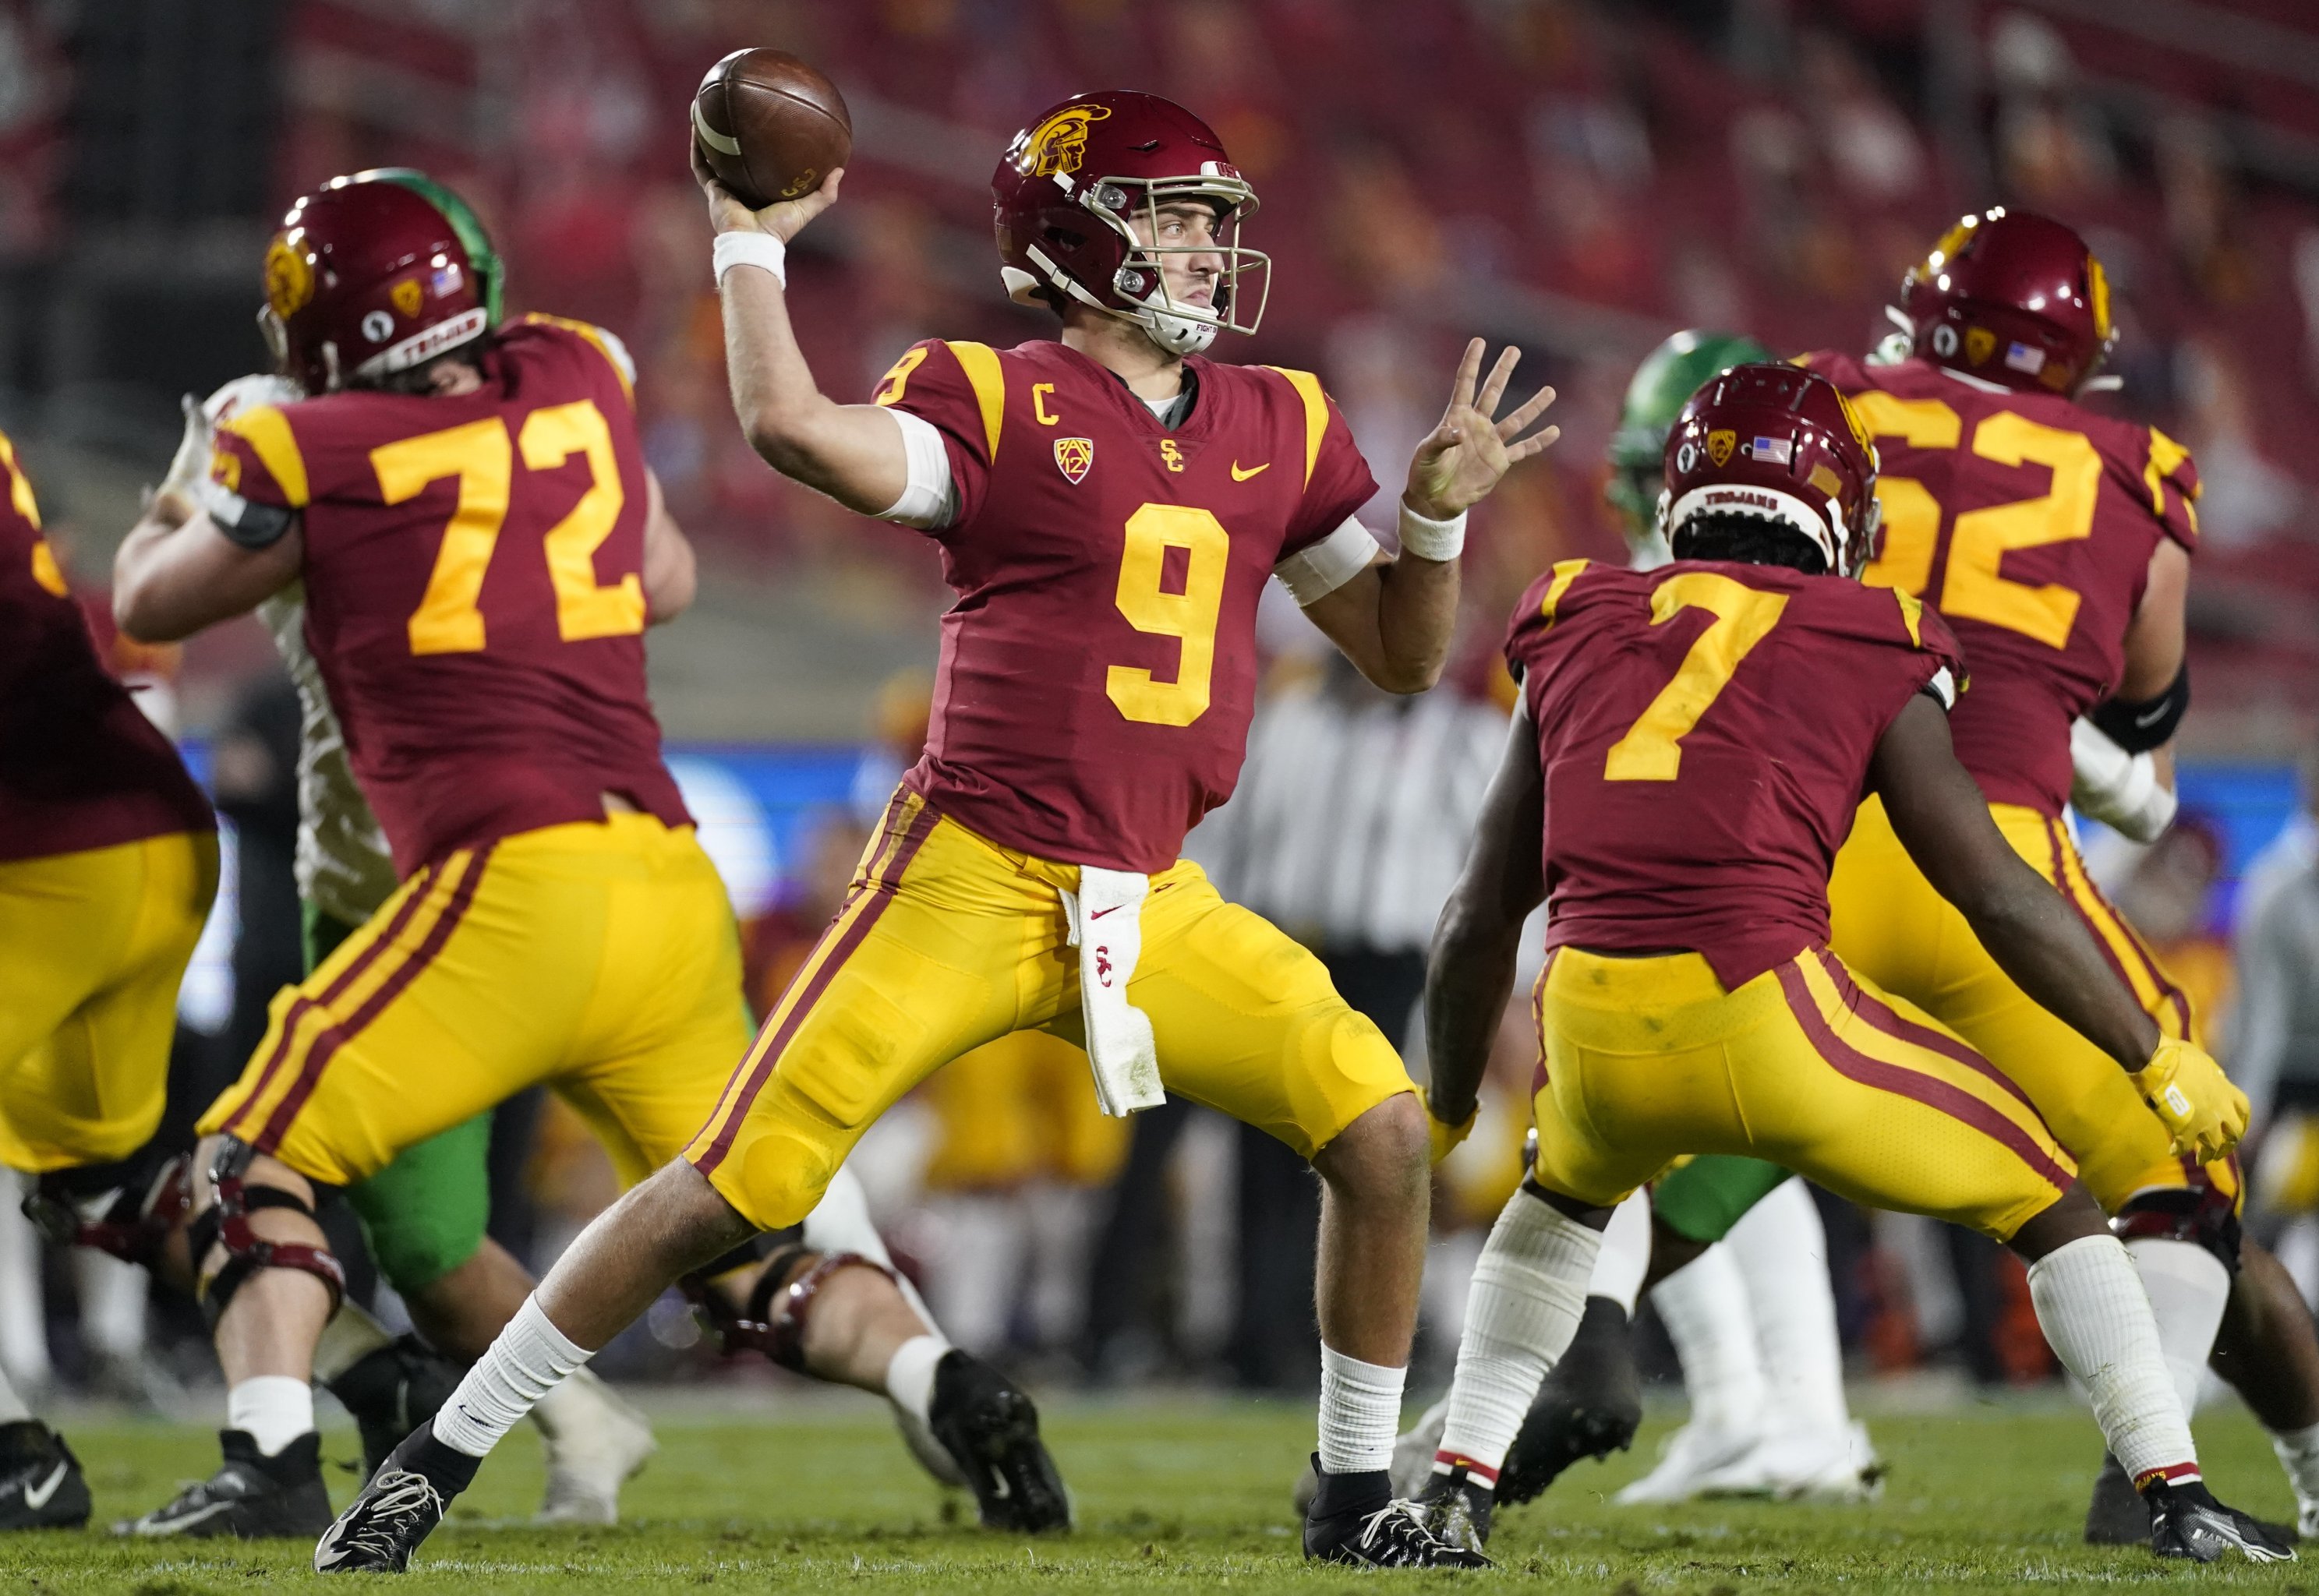 USC Spring Game 2021 Top Storylines and Prospects to Watch